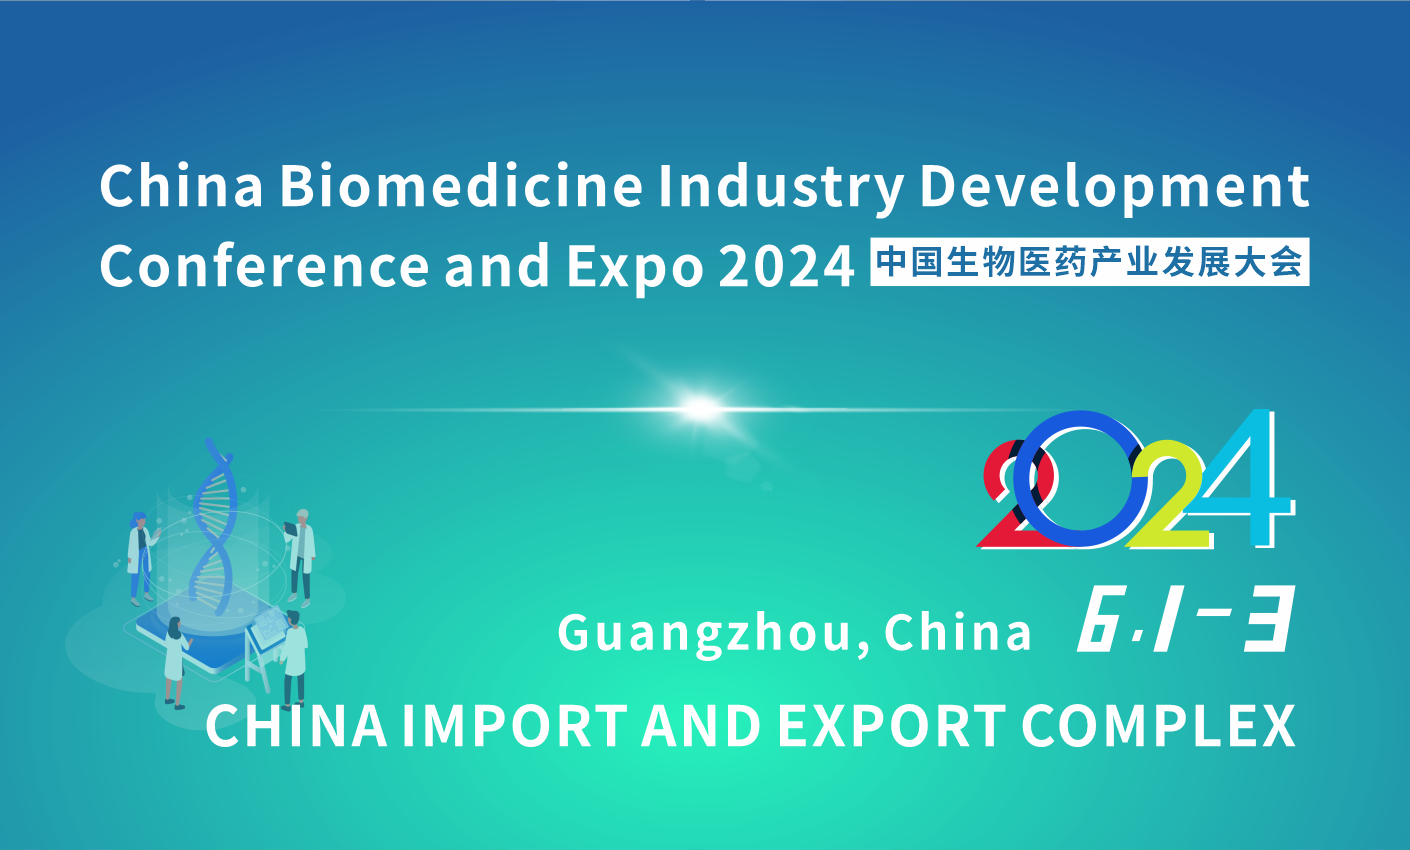 2024 China Biomedical Industry Development Conference